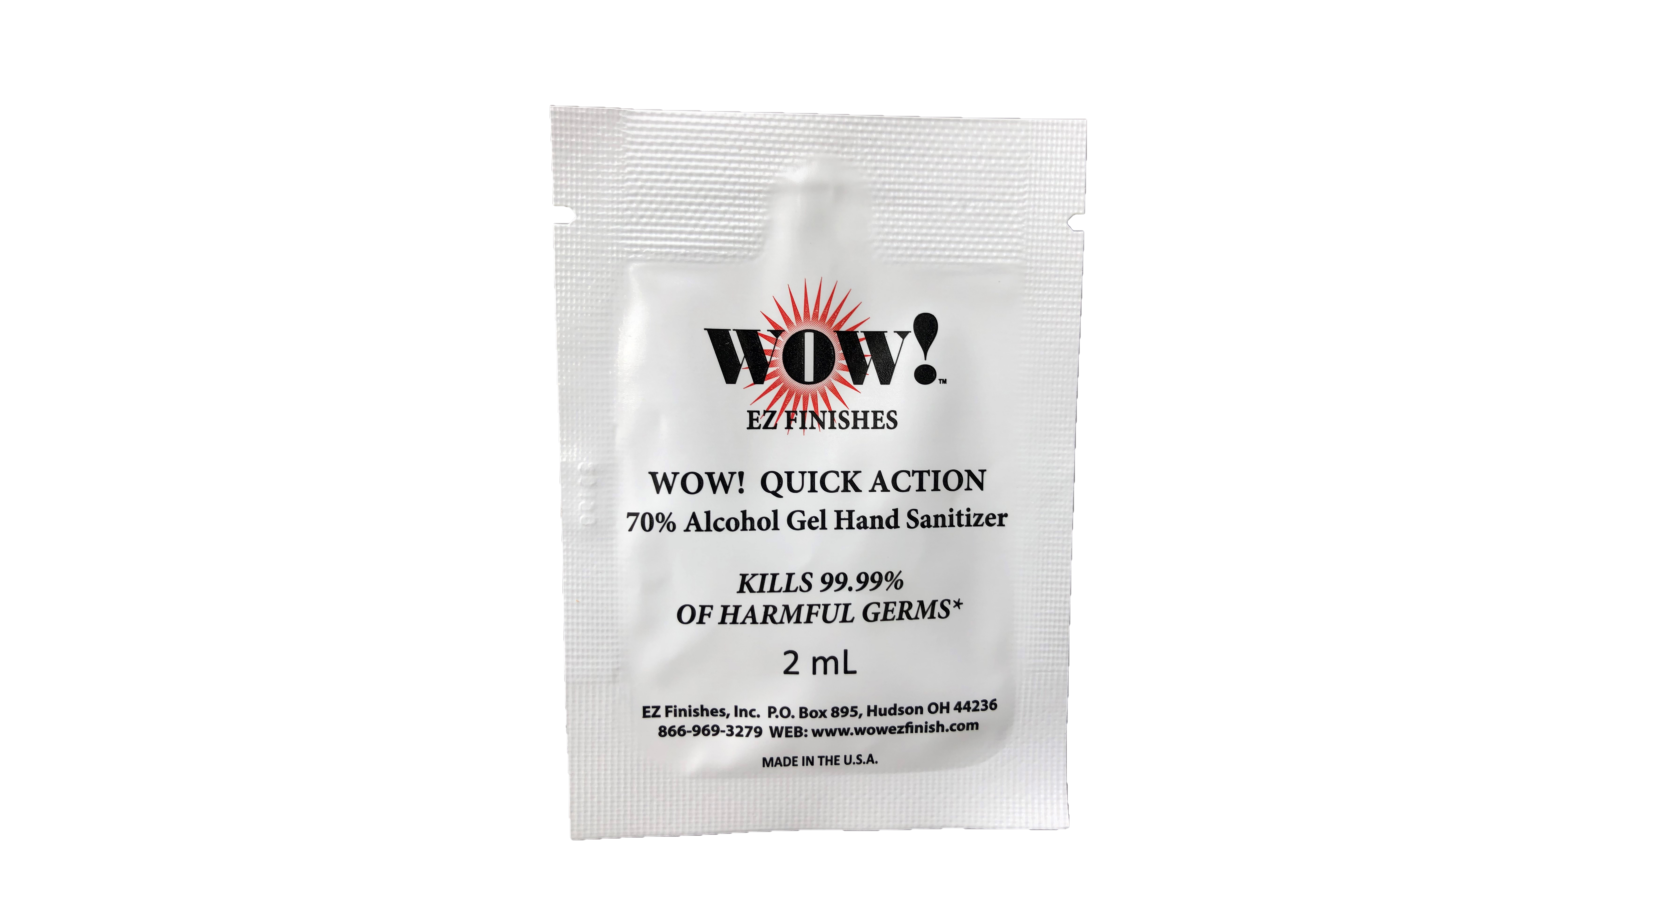 WOW! Stainless Steel Wipes 6-30 towelette case